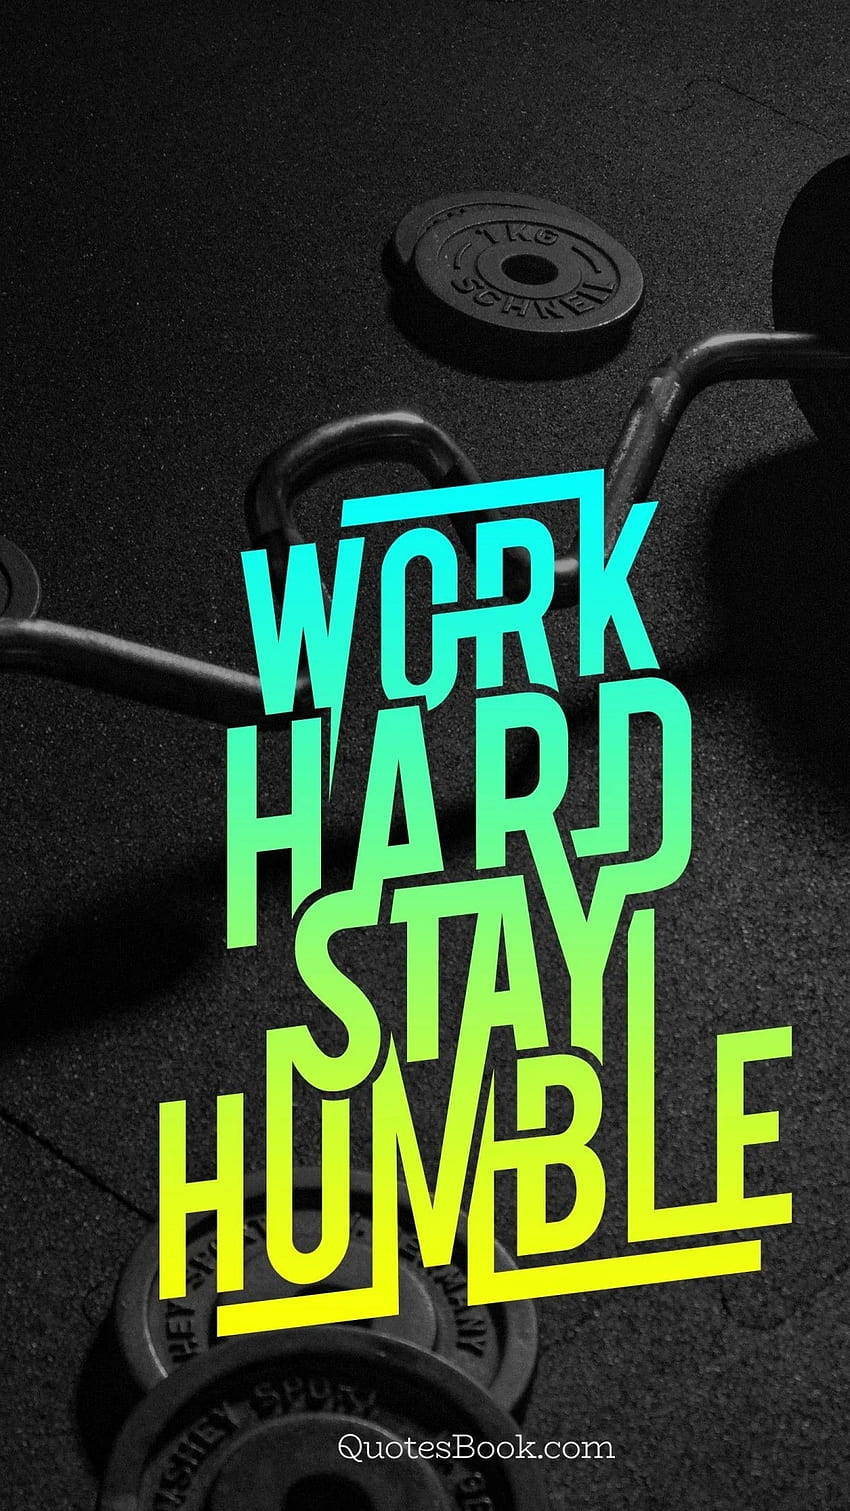 Quote on Work Hard 4K Wallpaper  HD Wallpapers